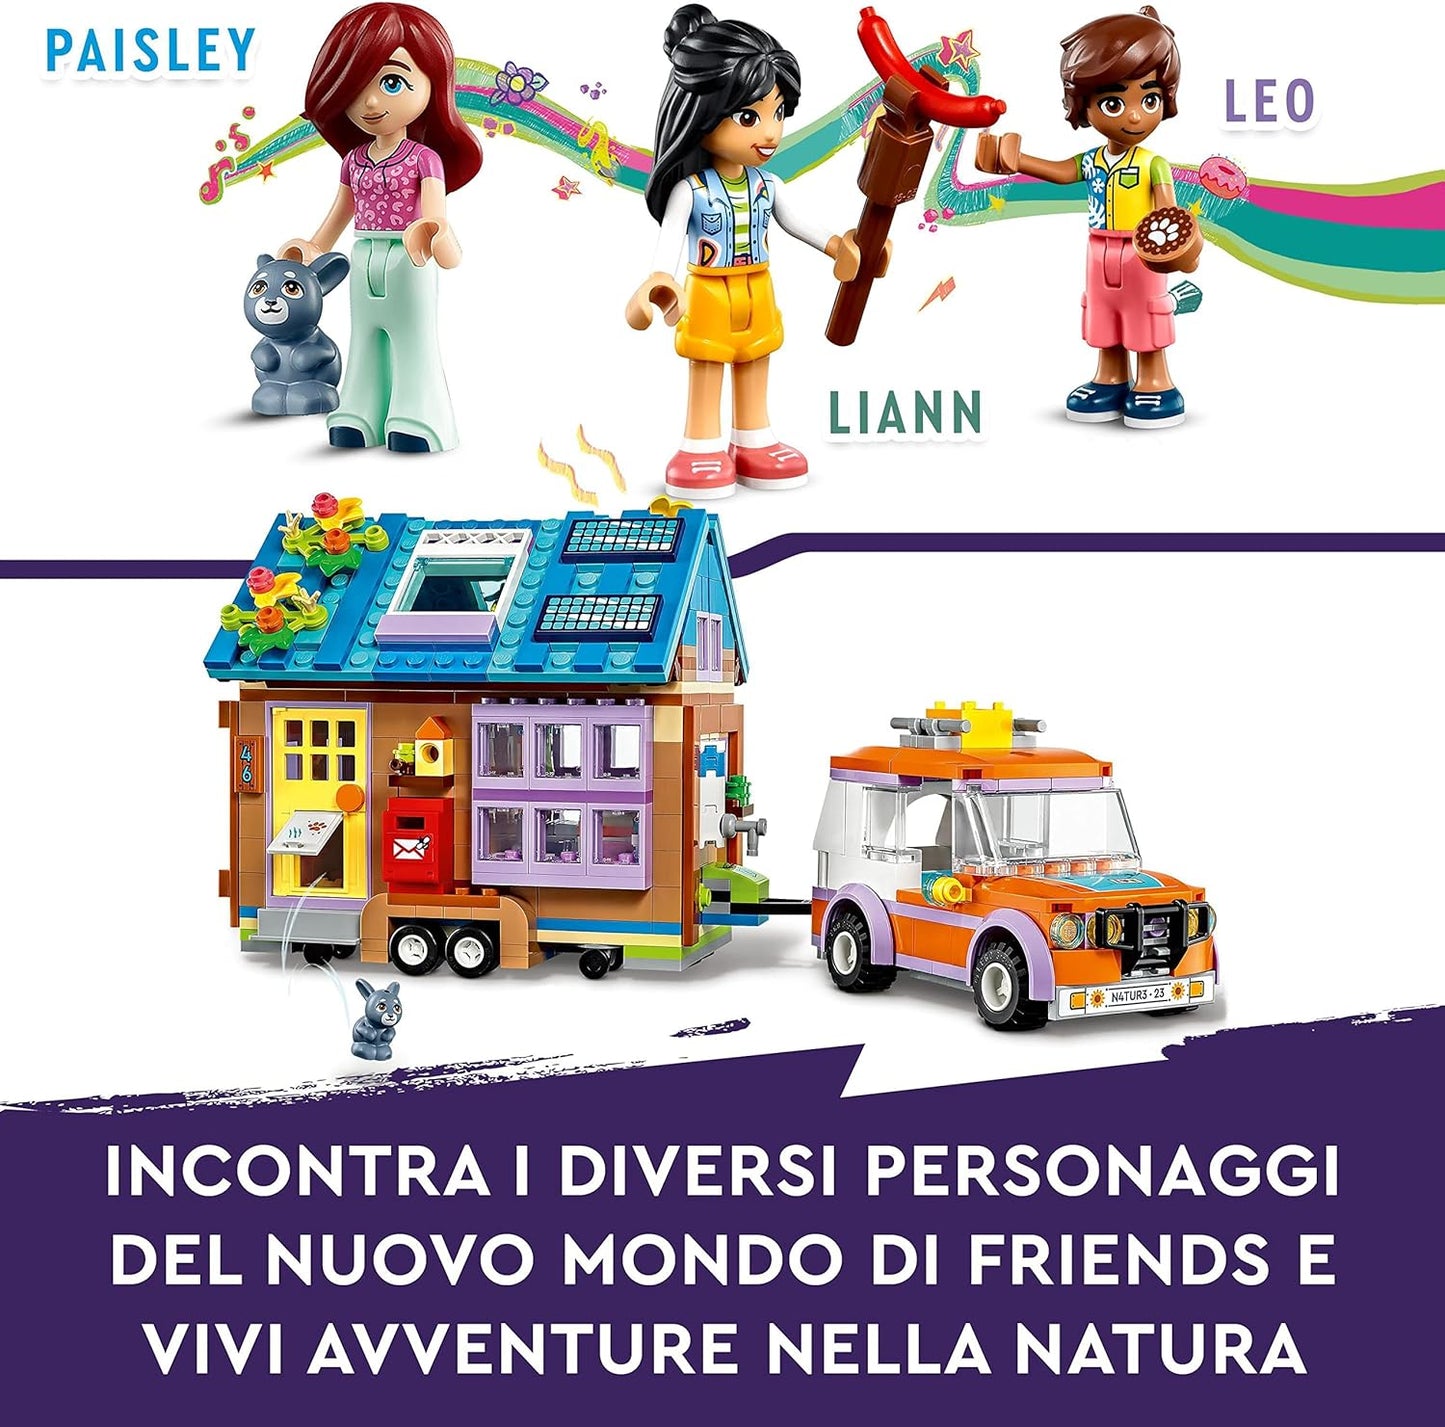 LEGO Friends 41735 Portable Little House Toy Blocks, Present, Pretend Play, Home, Girls, Ages 7 and Up